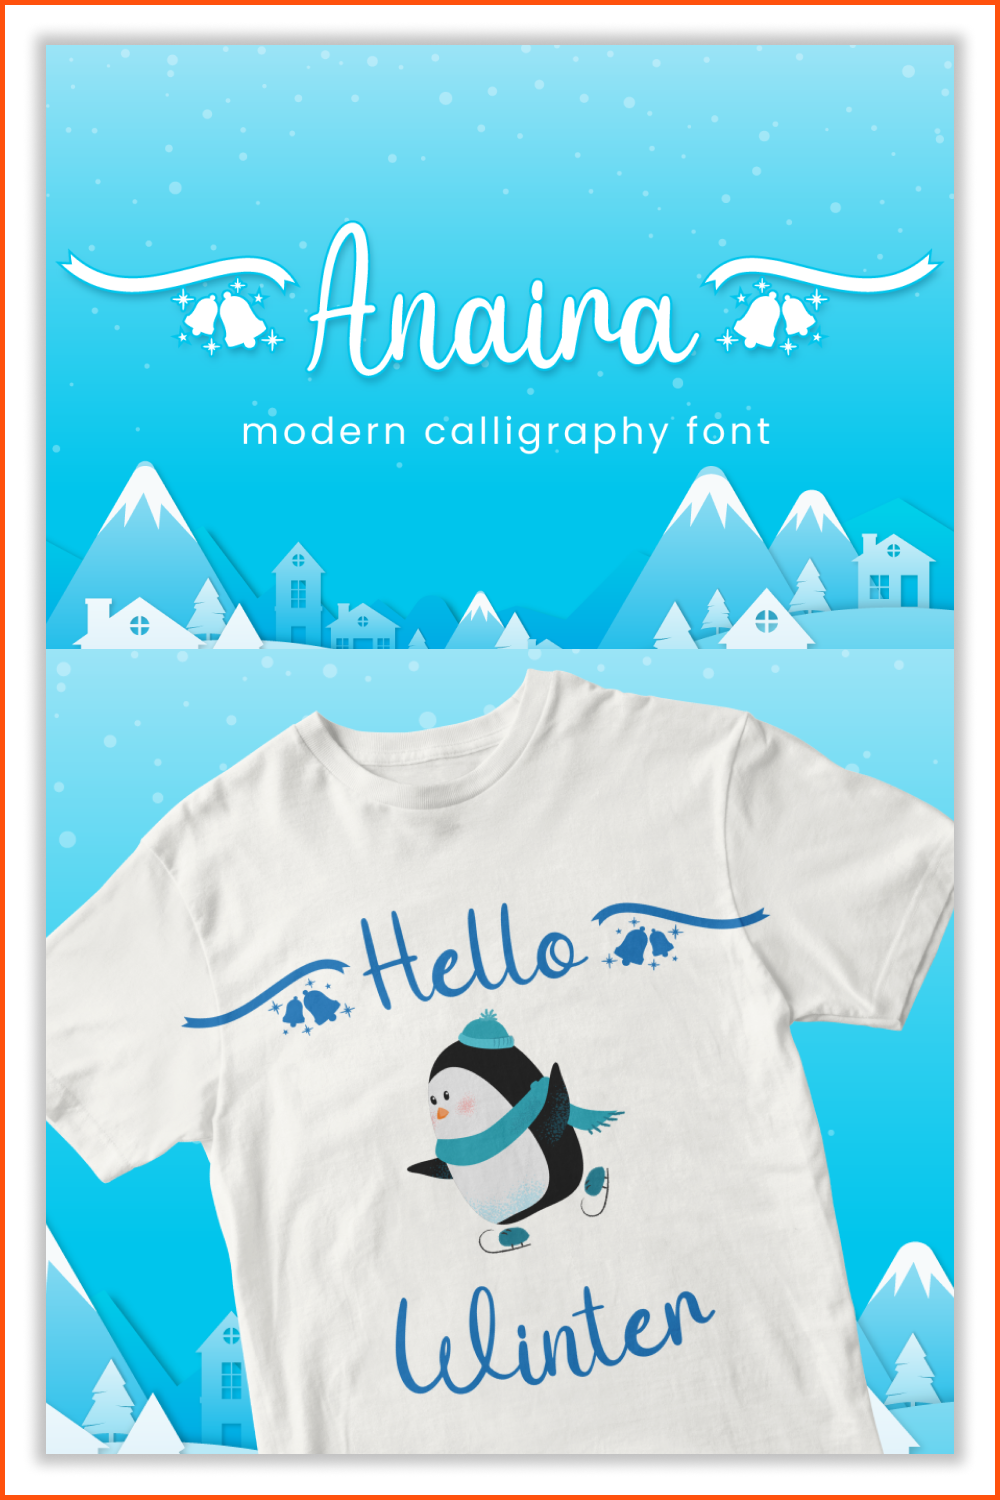 An example of a font on a white T-shirt with a picture of a funny penguin.